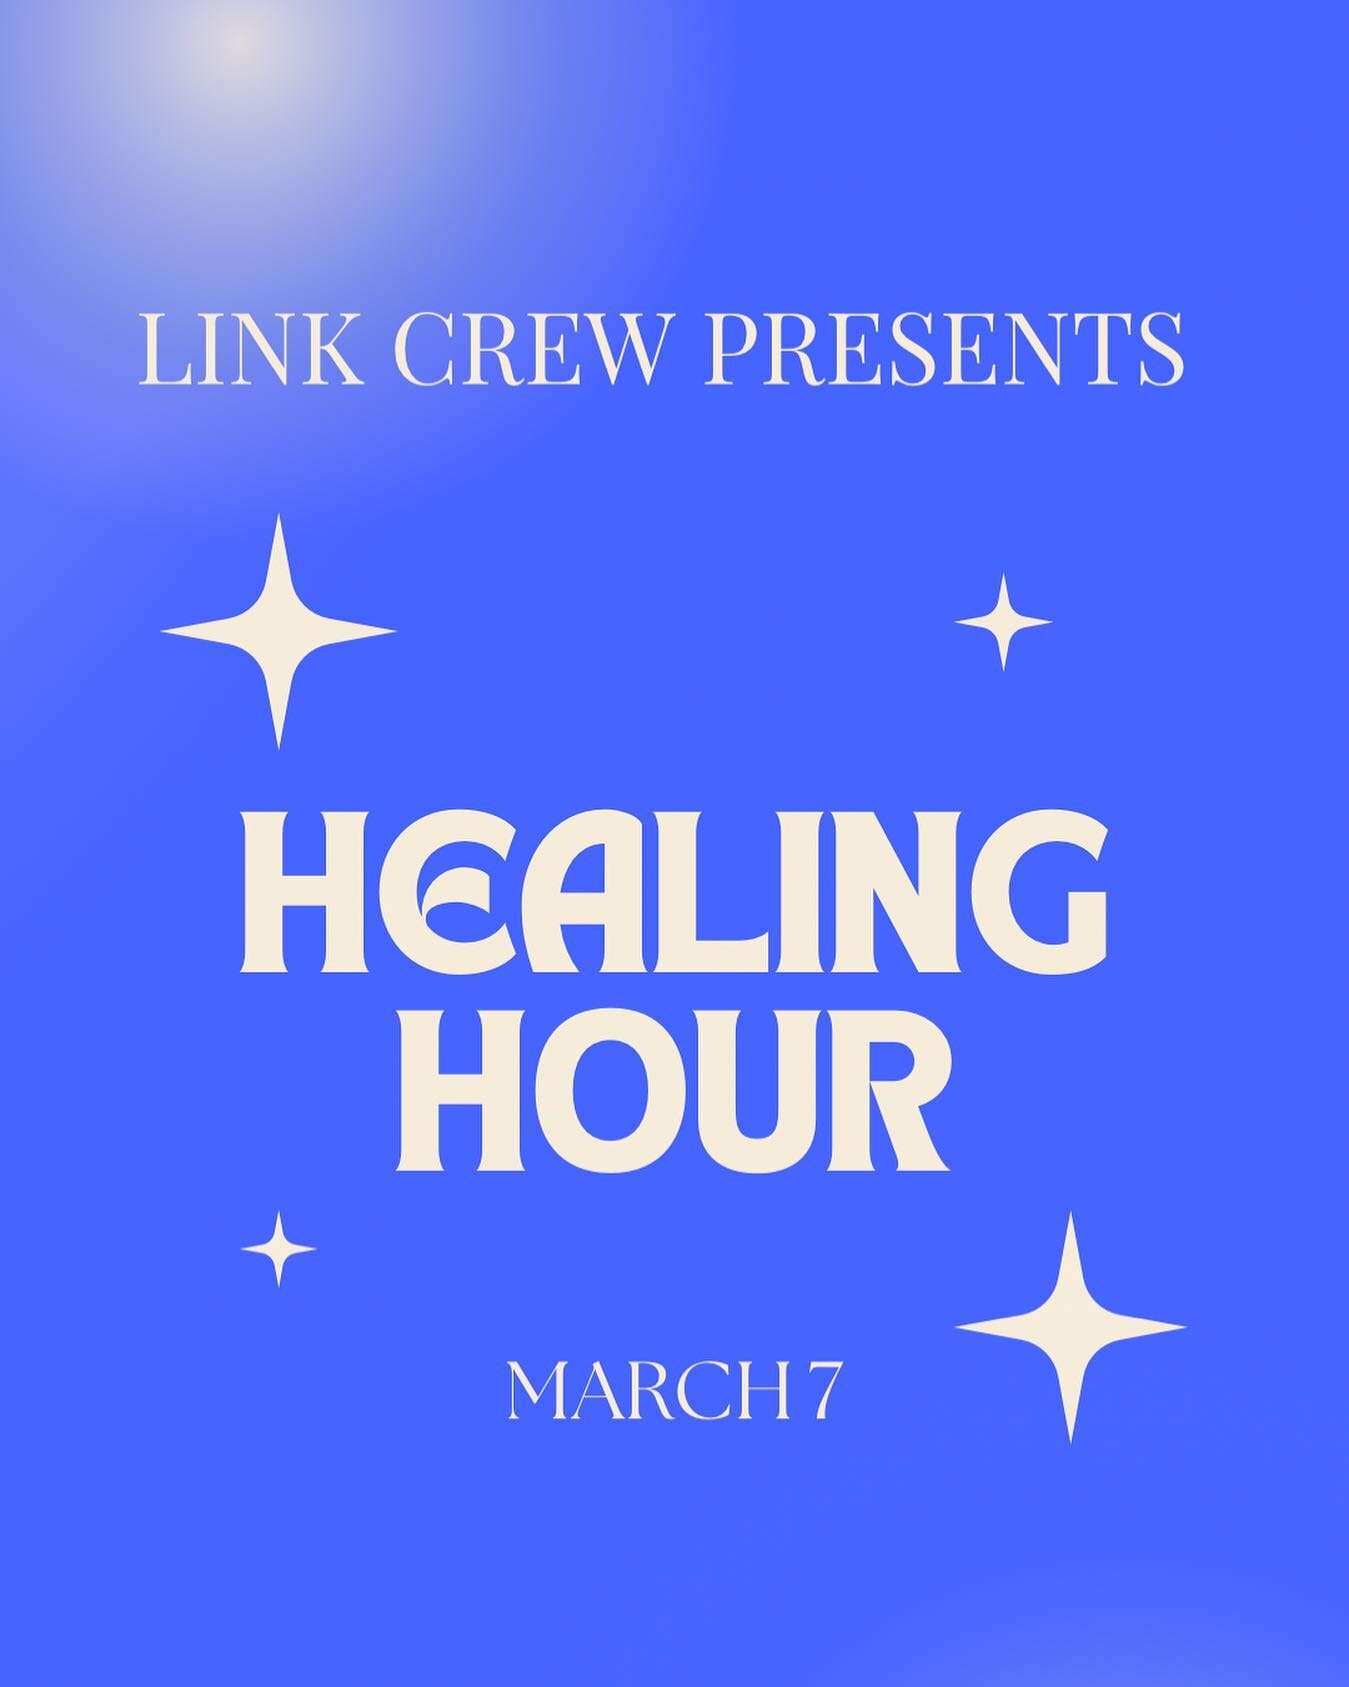 LINK CREW IS EXCITED TO SEE YOU ALL TOMORROW AT HEALING HOUR!!🤍💙